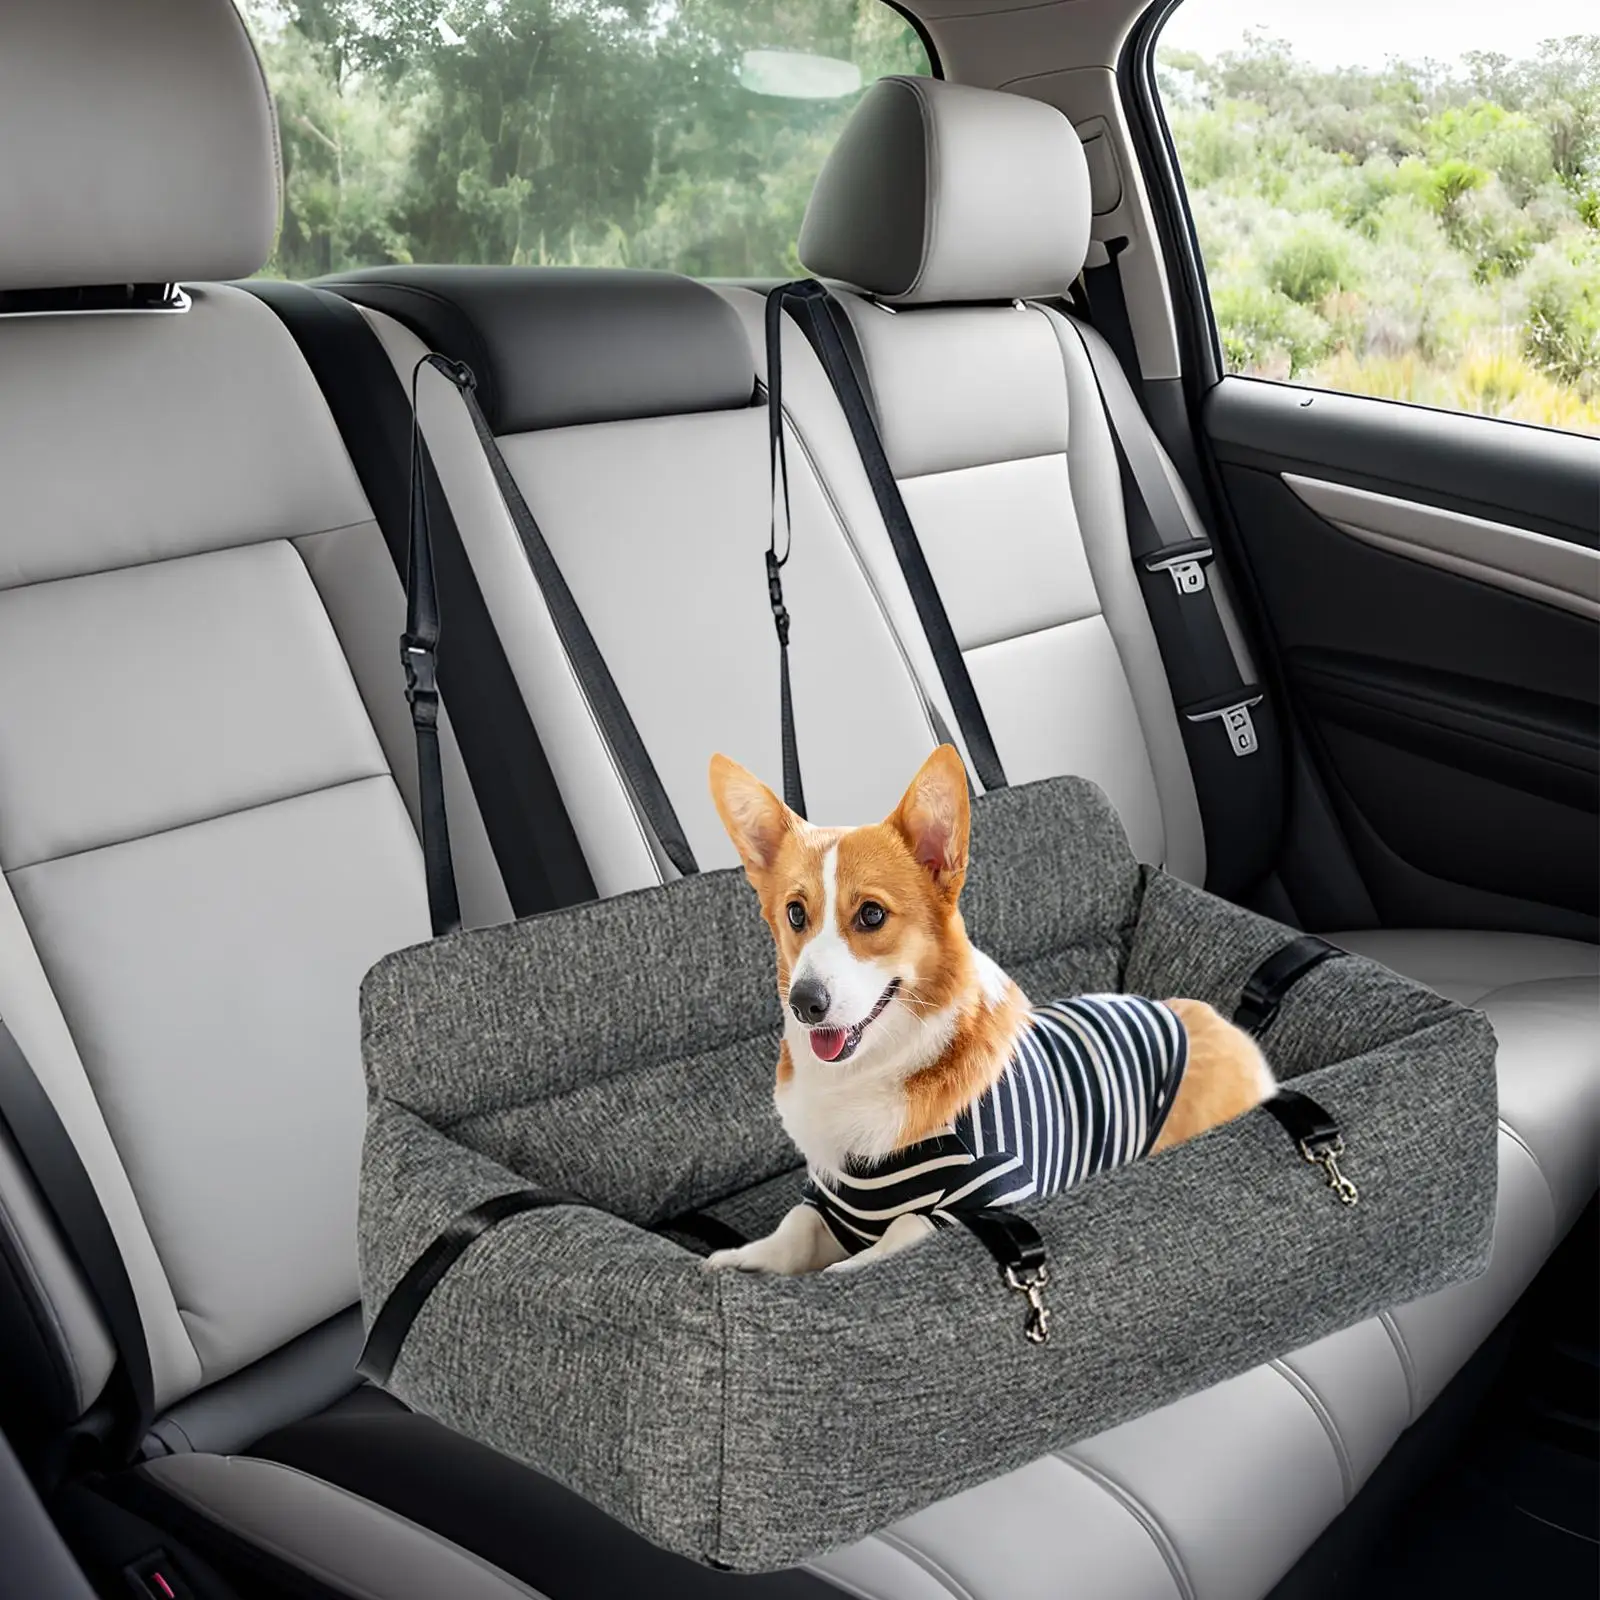 Dog Booster Seat Safety Leash Protection Removable Pad Dog Car Seat for Cats Small Medium Dogs Large Dogs Kitten Pet Supplies